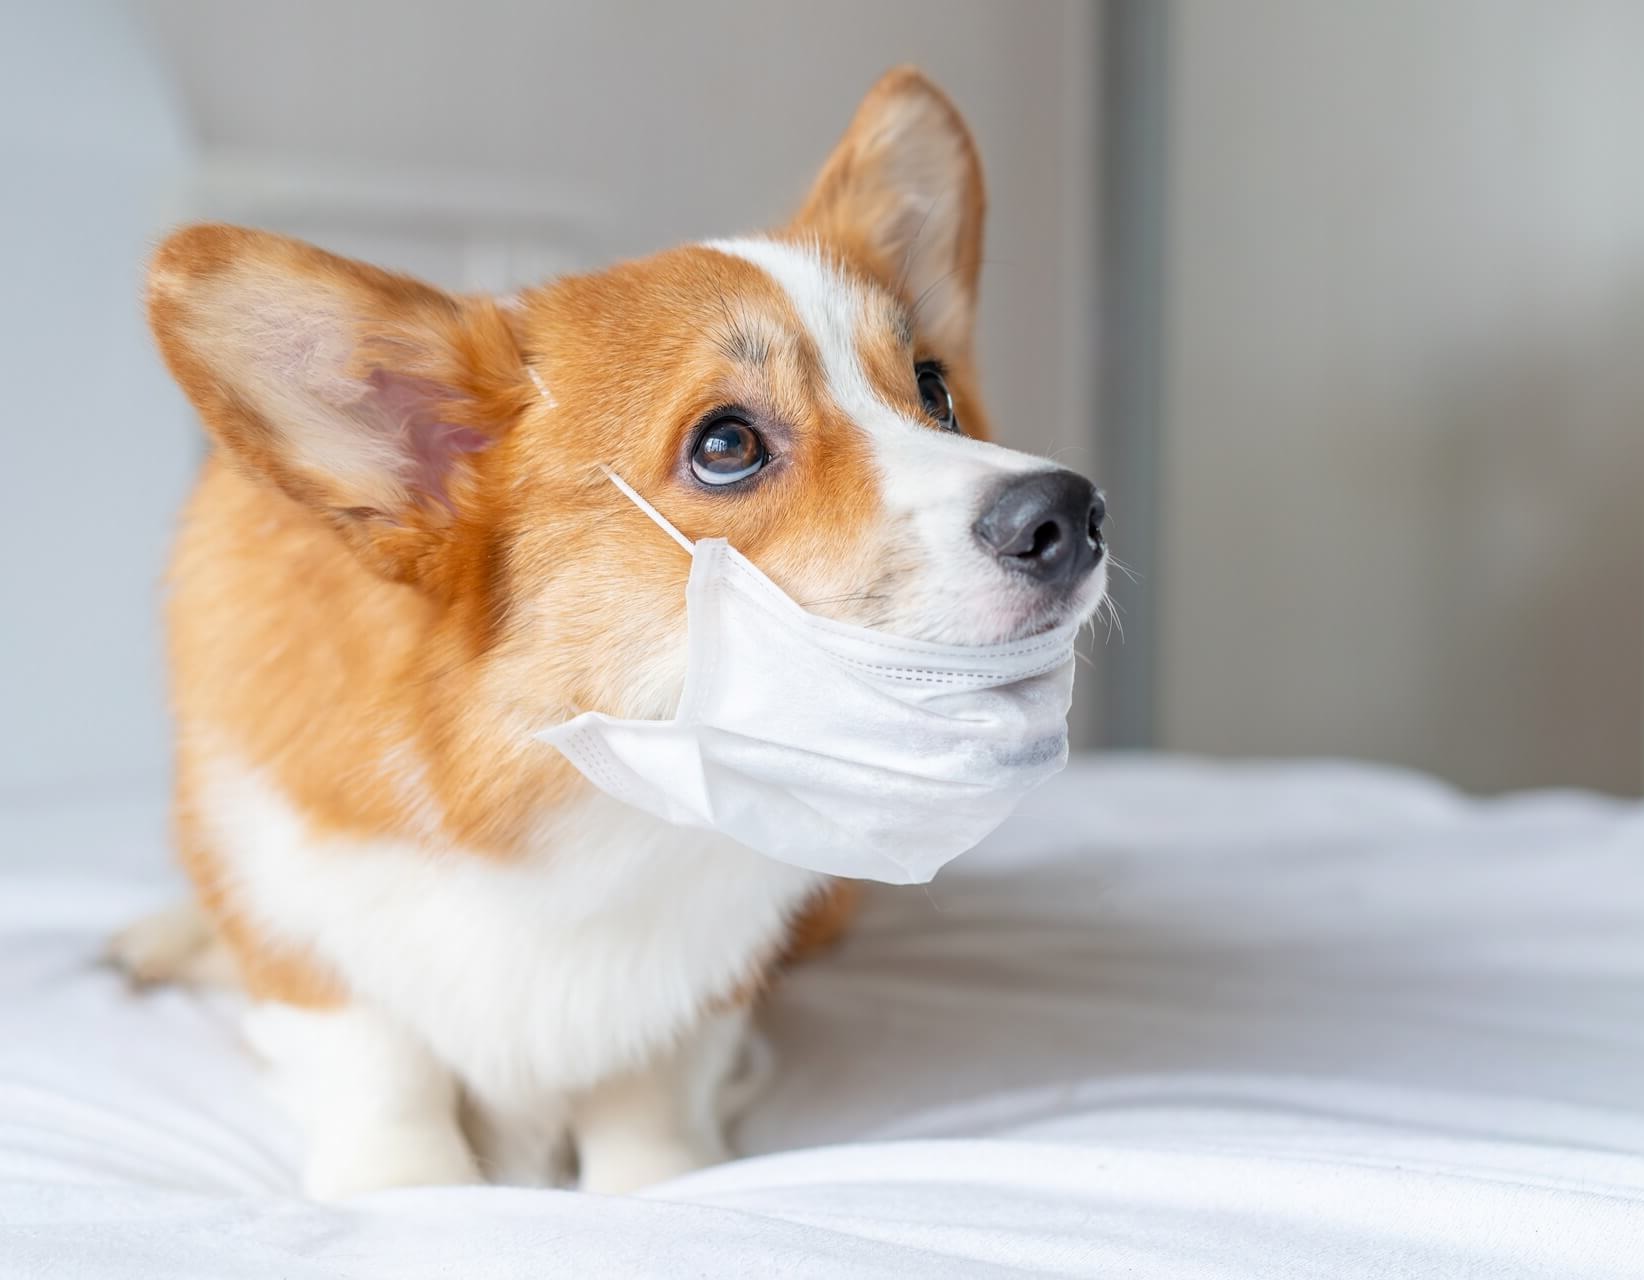 Dog with surgical mask